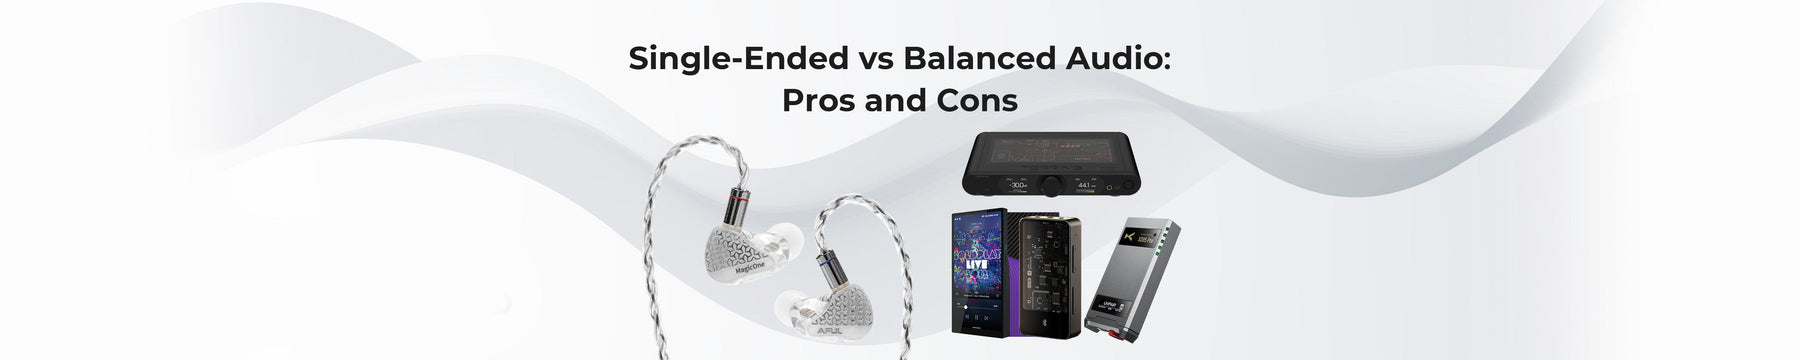 Single-Ended vs Balanced Audio: Pros and Cons